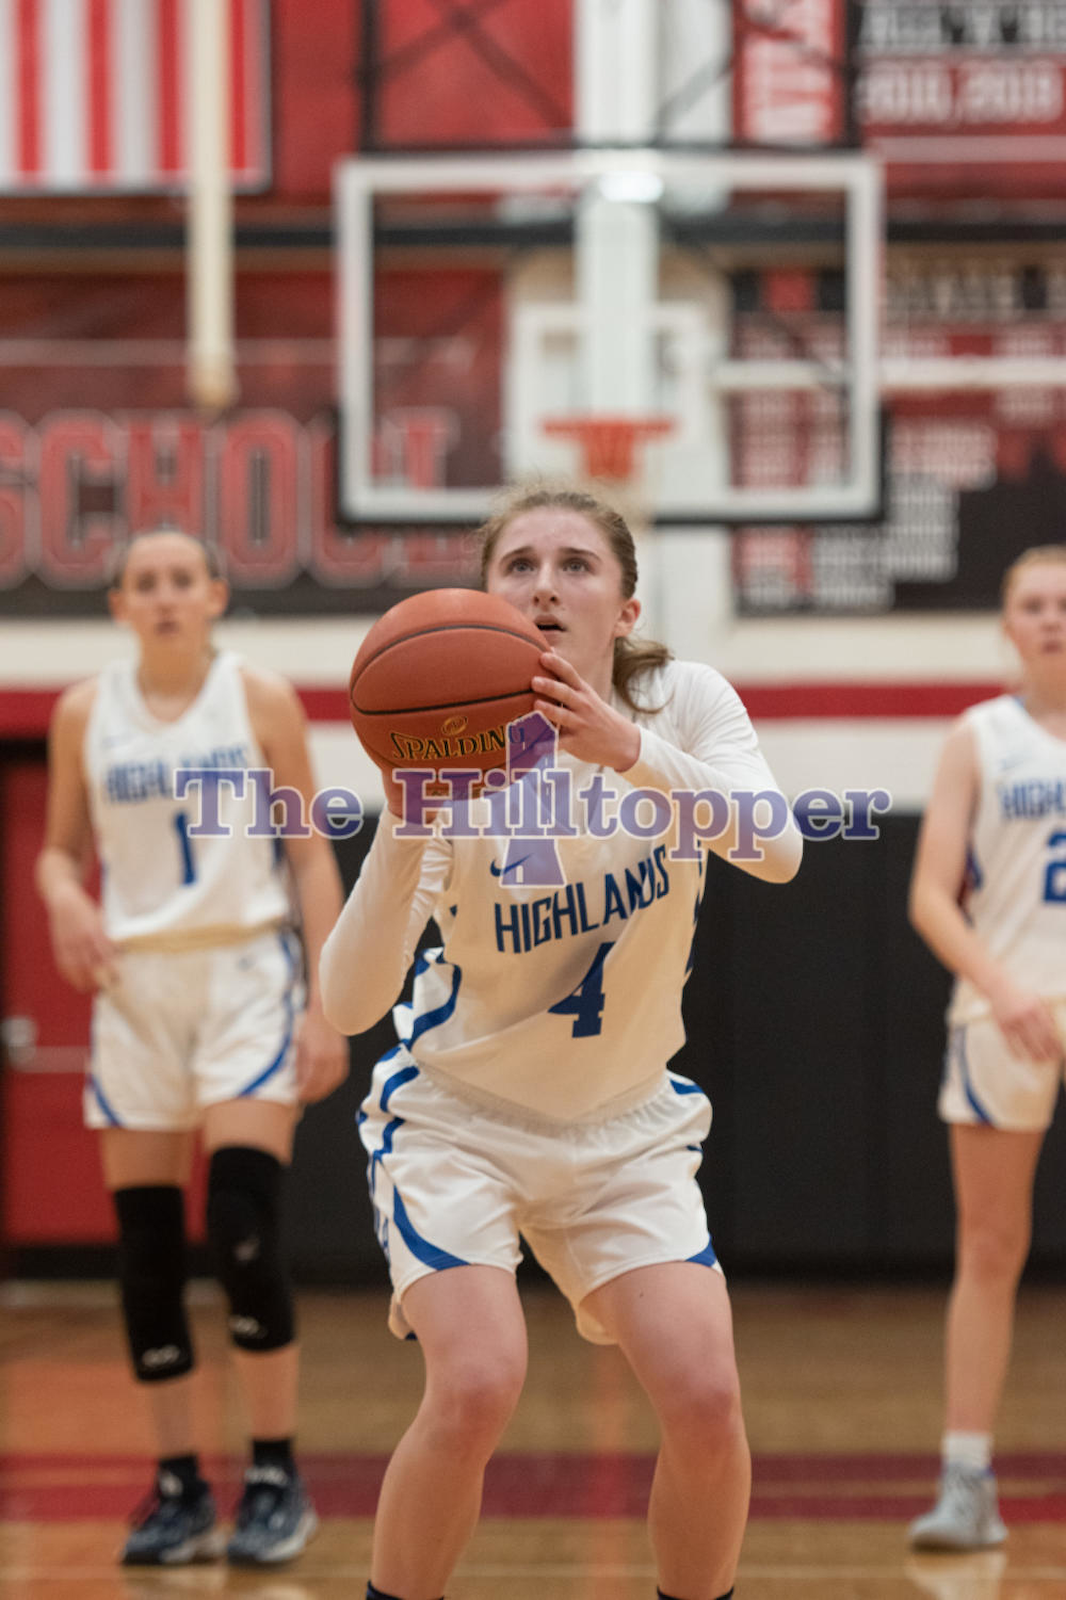 Senior-Alyssa-Harris-takes-her-time-during-the-free-throw-late-in-the-Walton-Verona-game.-Liam.png